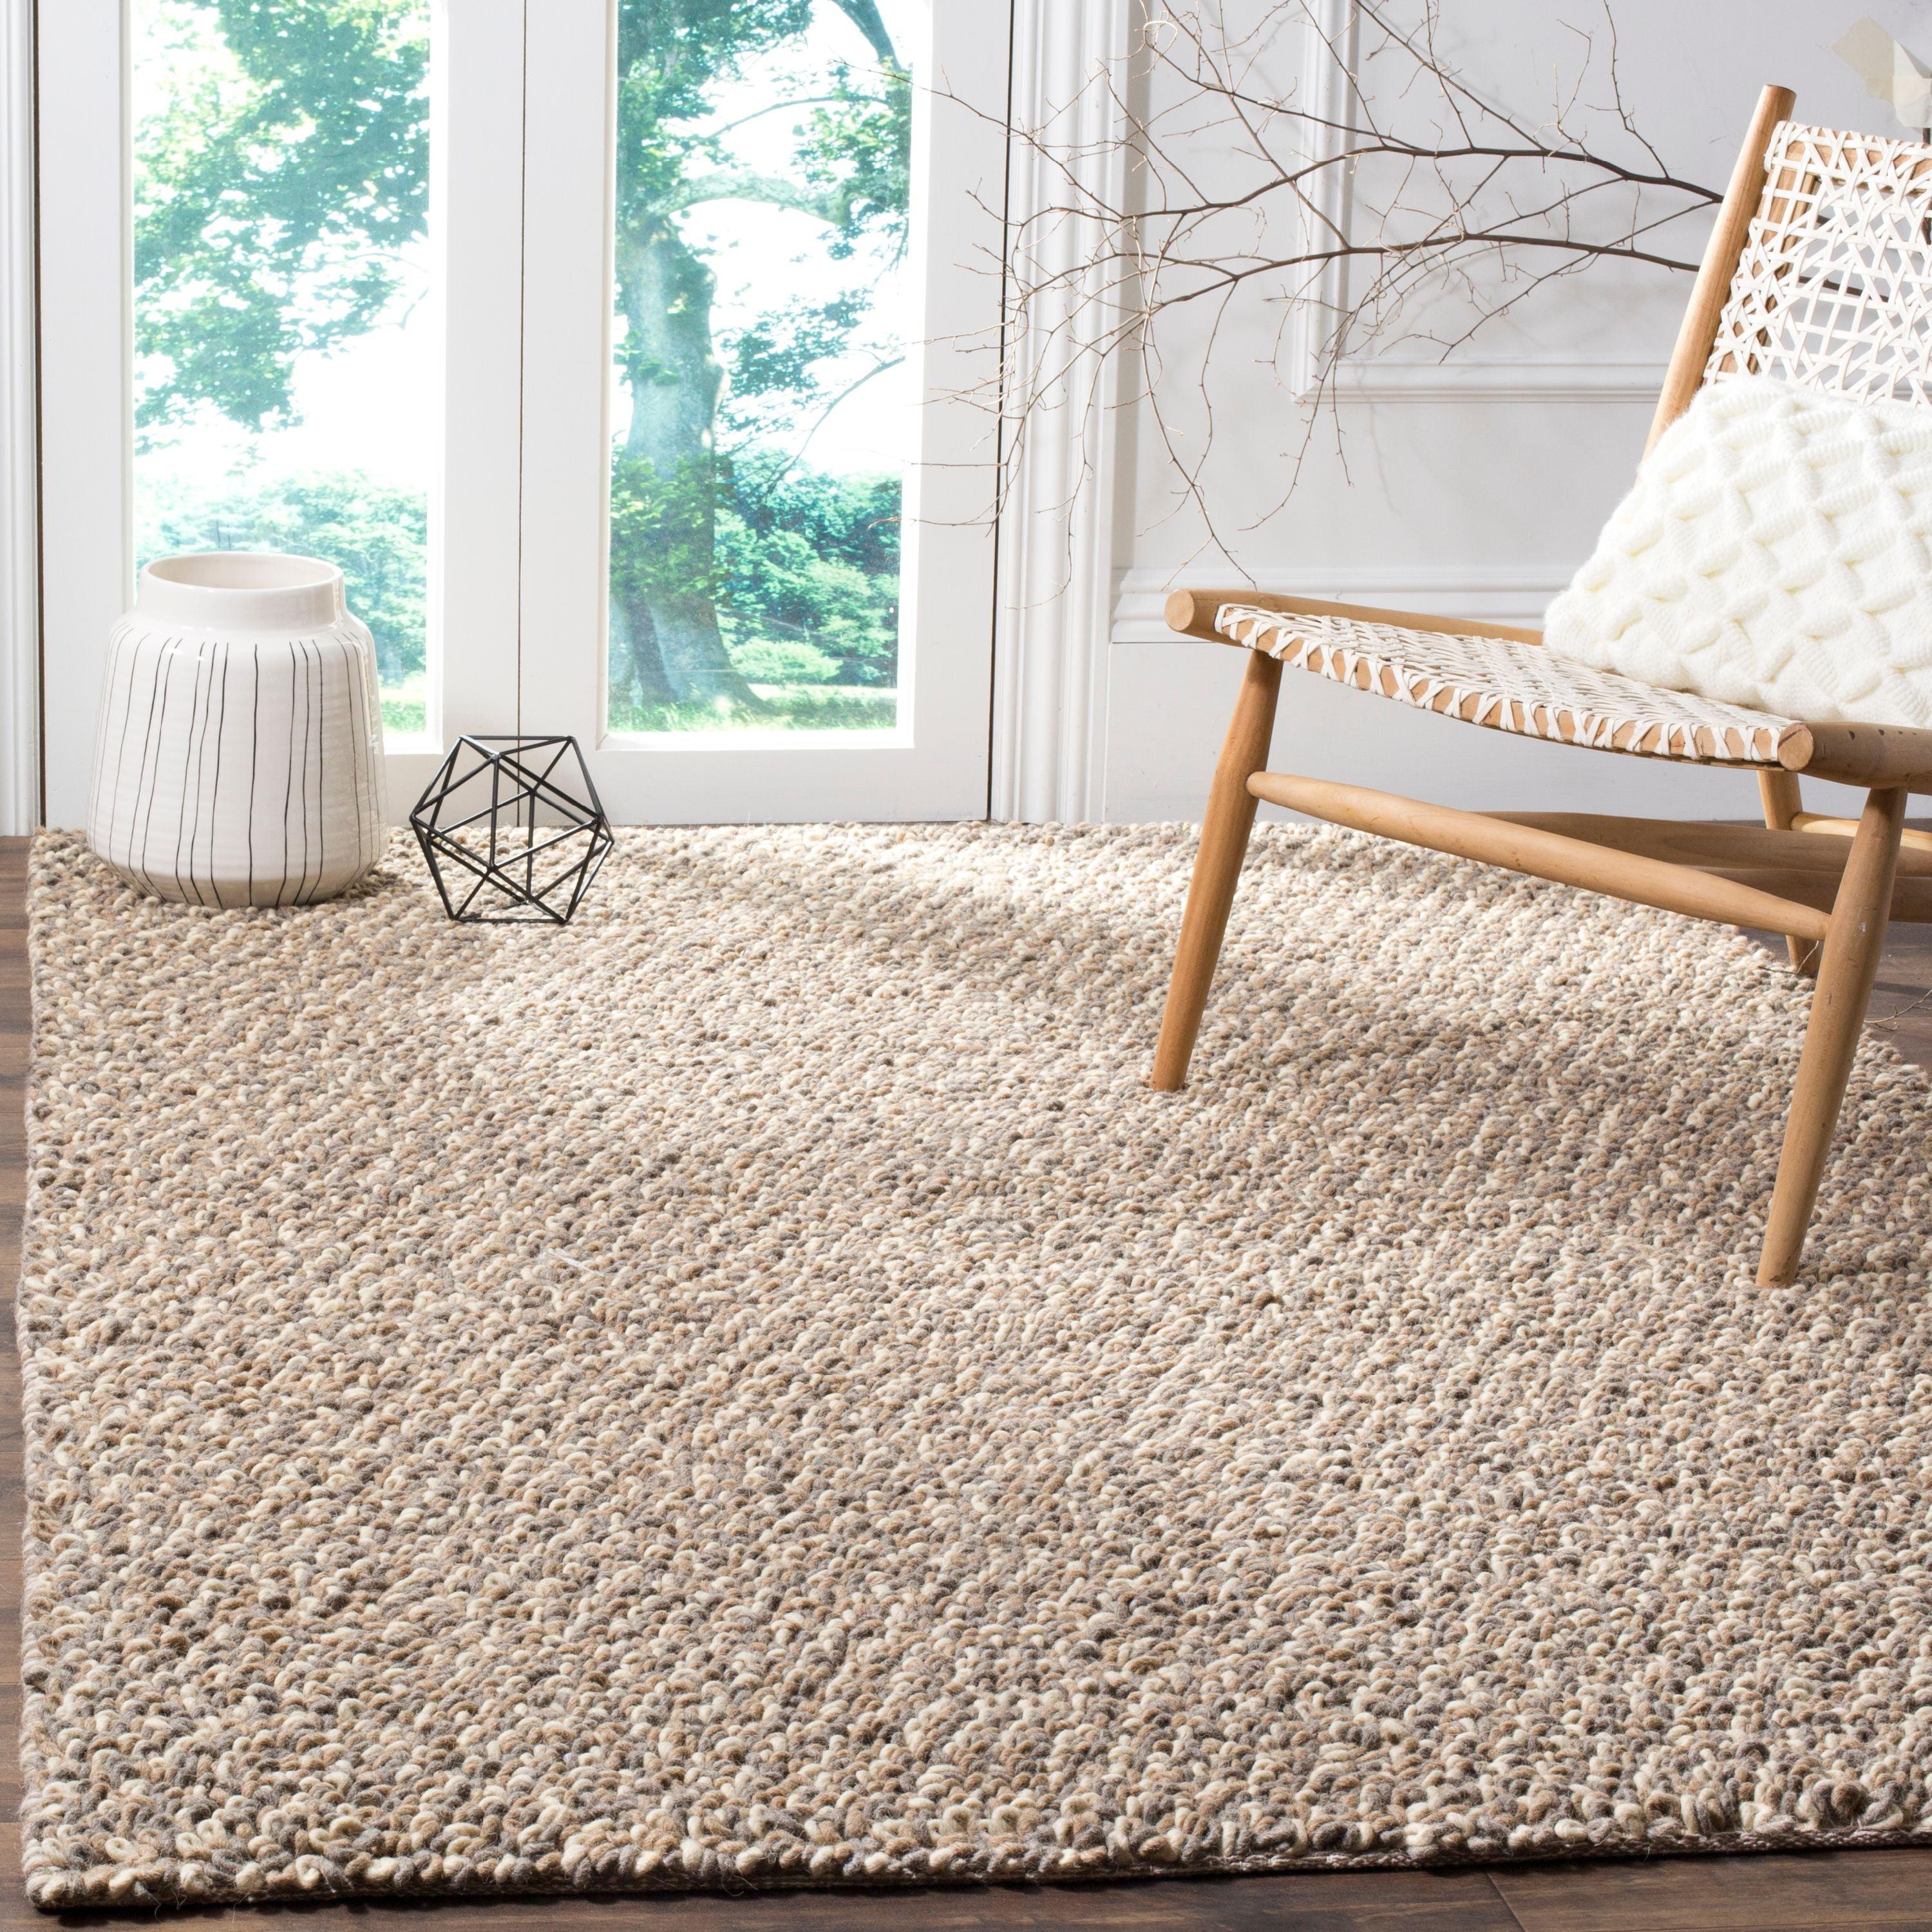 Luxurious Hand-Knotted Gray Shag Wool Blend 6' x 9' Area Rug